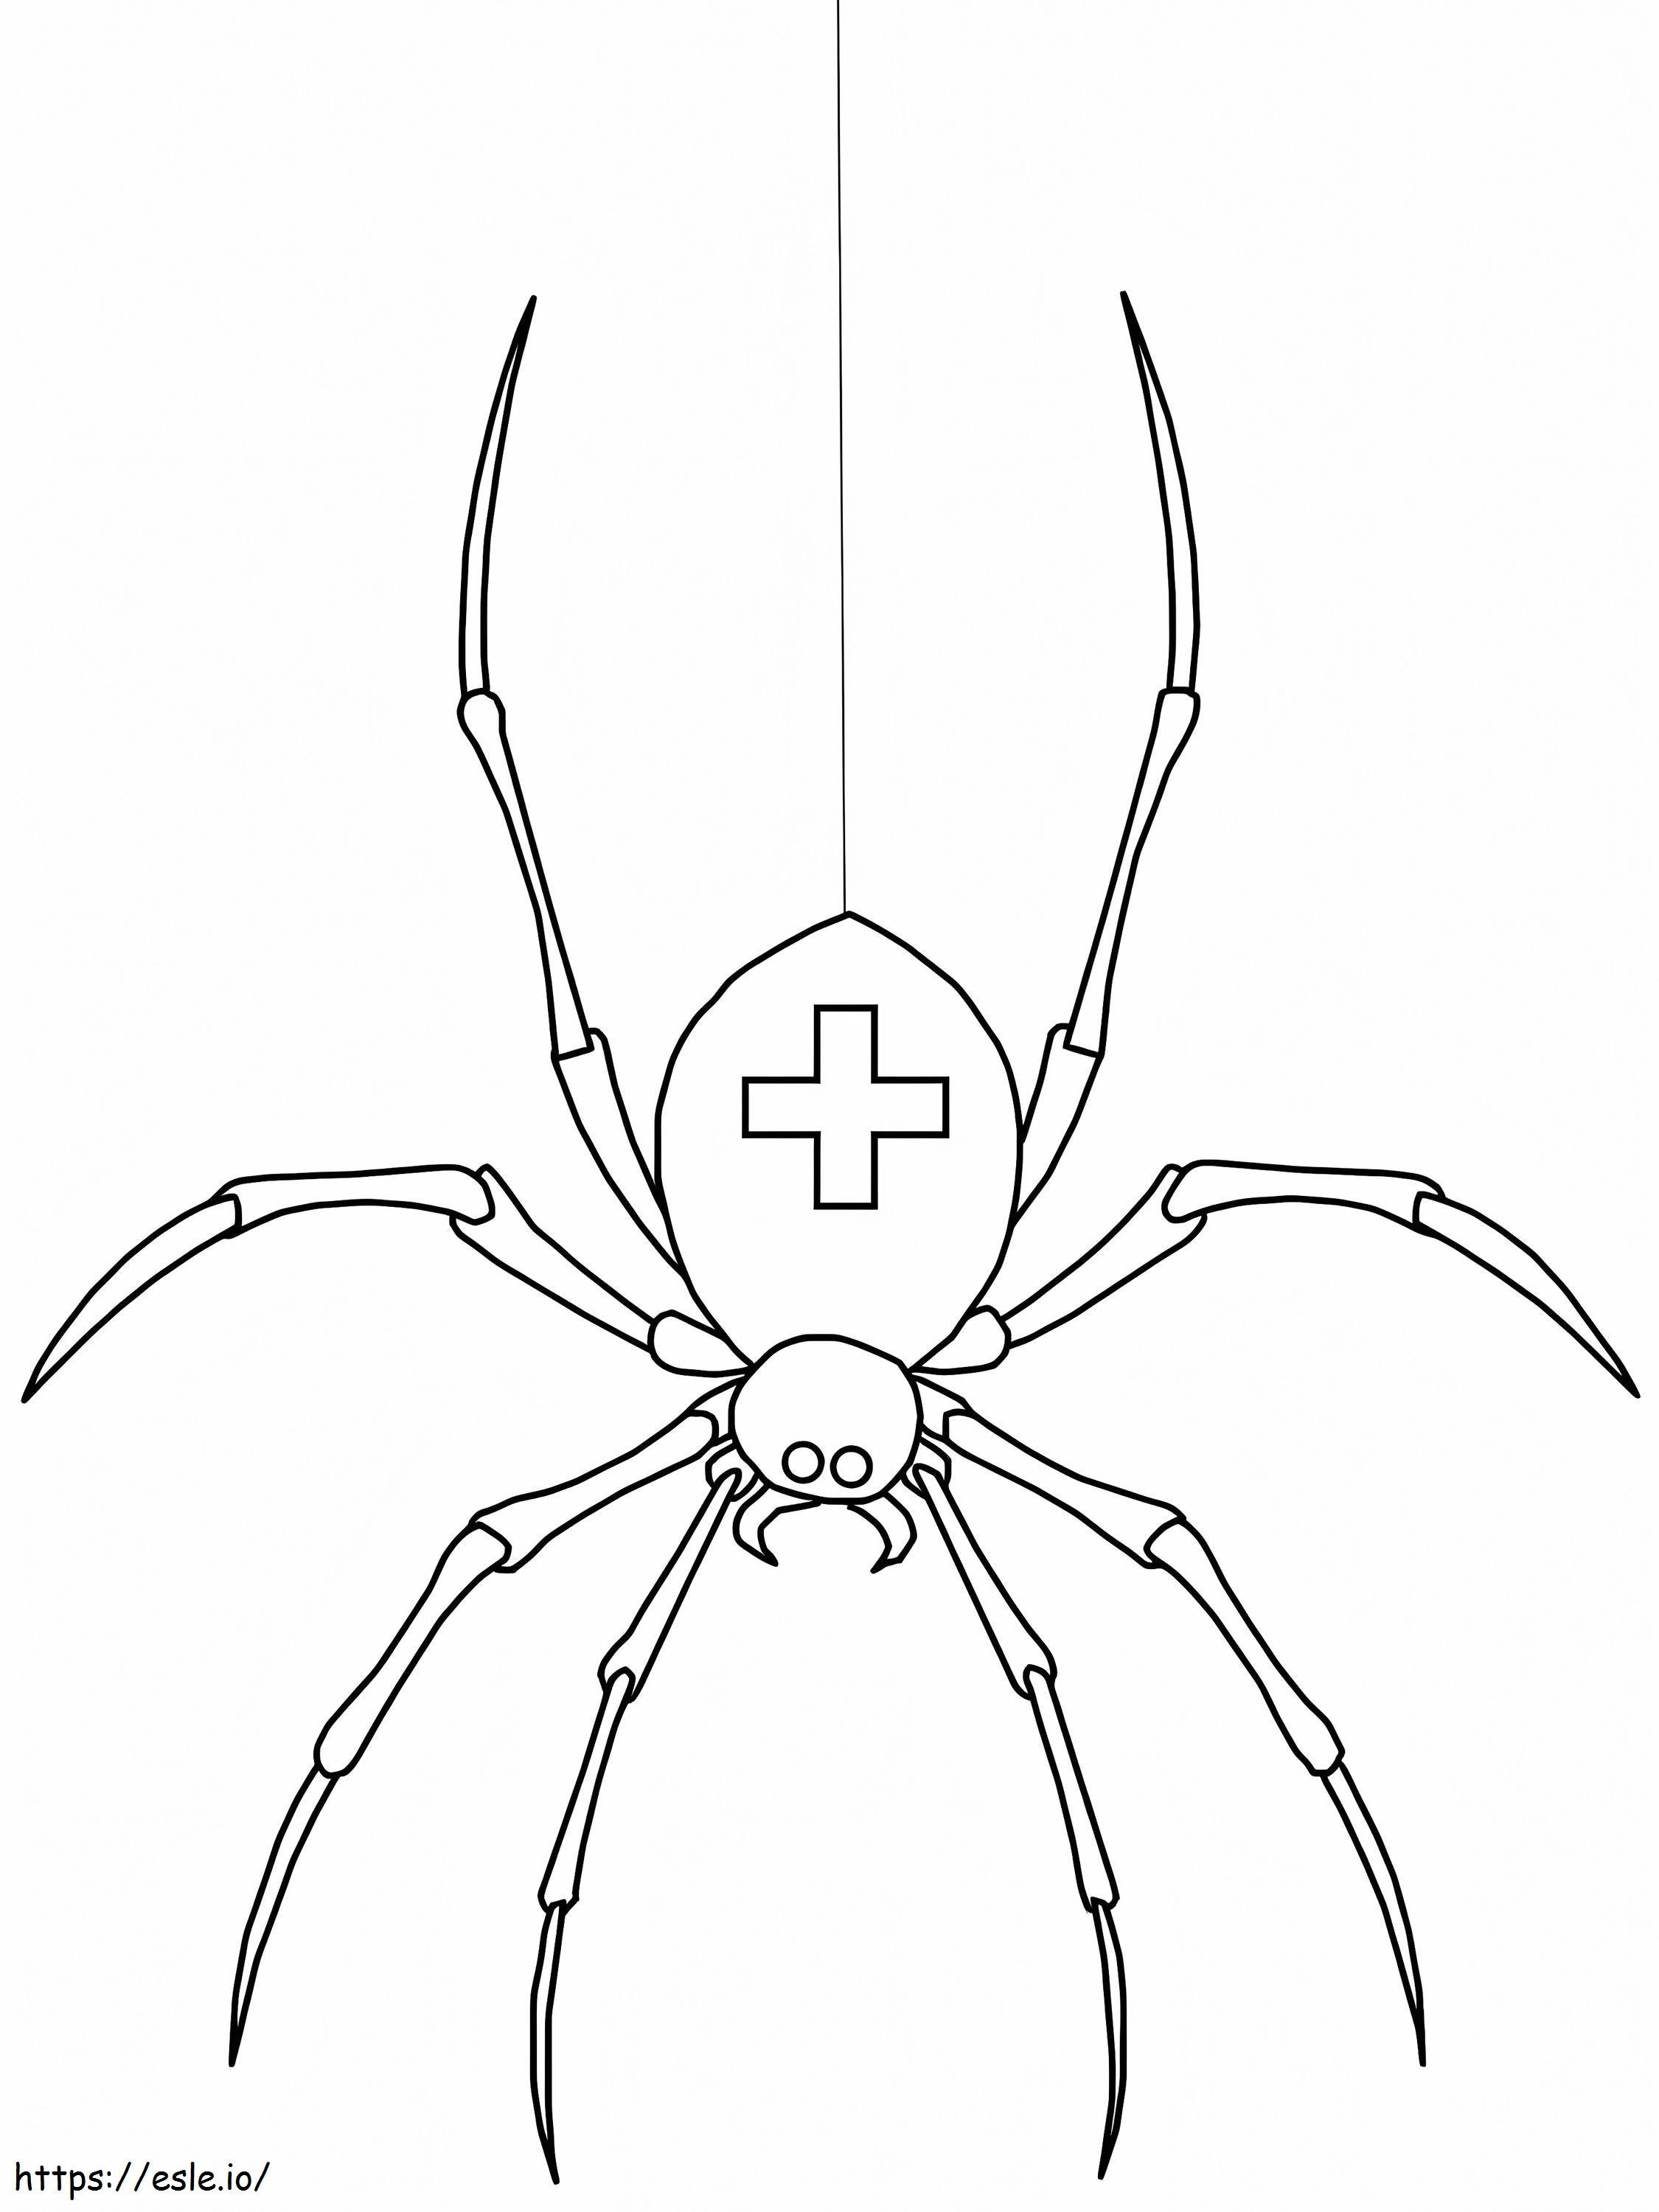 Medical Spider coloring page